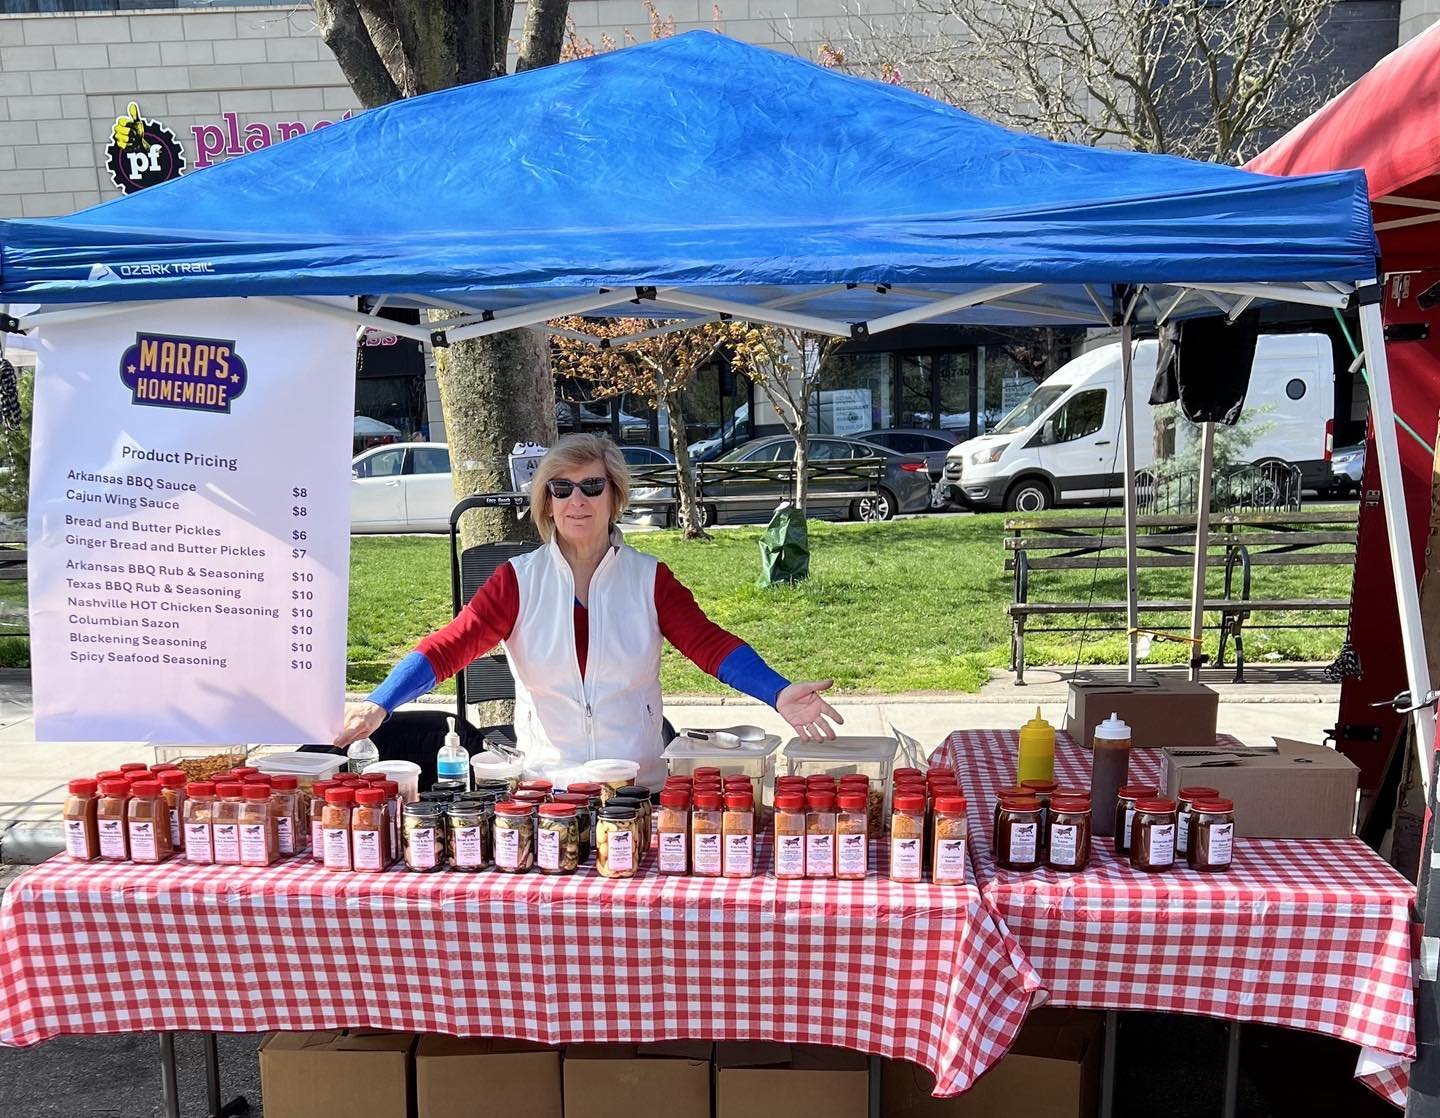 Today&rsquo;s fair is on Queens Blvd close to 70th Road in Forest Hills. It&rsquo;s a comfortable, sunny day to wander through with a Farmer&rsquo;s Market behind us! Come on by! Add some #flavor to your day!